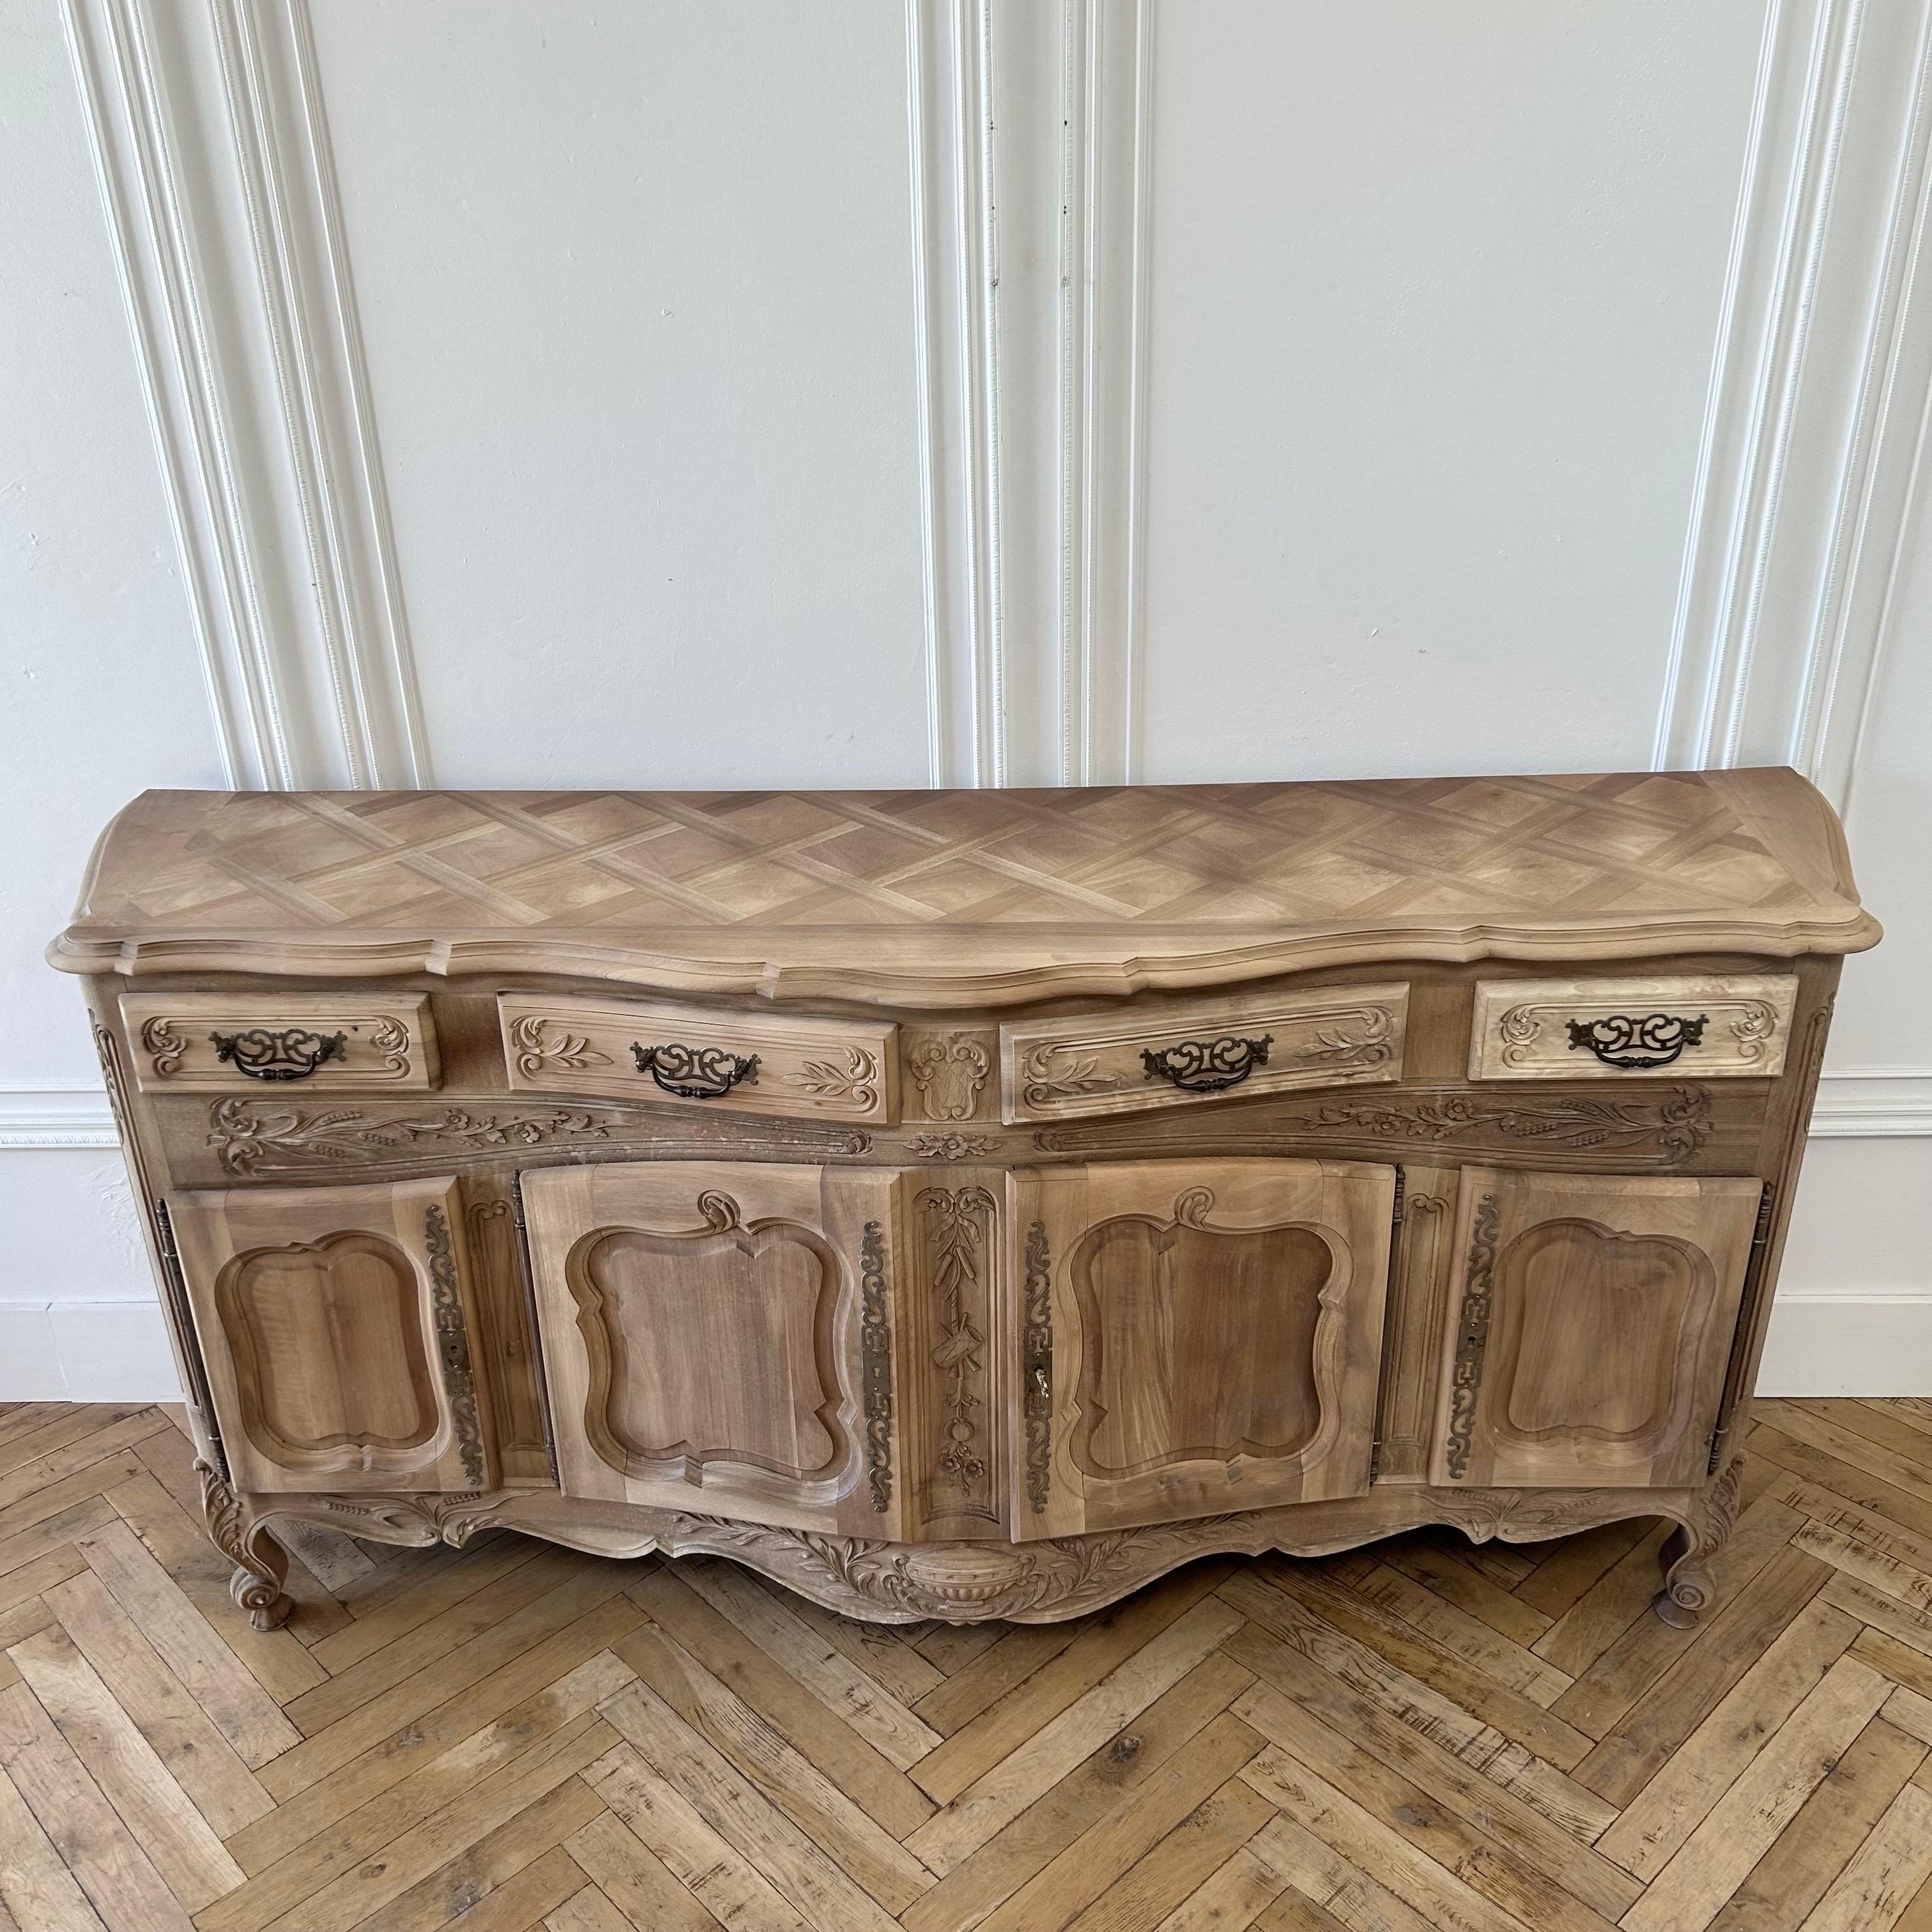 Oak sideboard 
Size 90”w x 24”d x 43”h
Beautiful vintage buffet with drawers and doors, plenty of storage.
Large grand size with beautiful parquet top. In a natural raw wood finish.